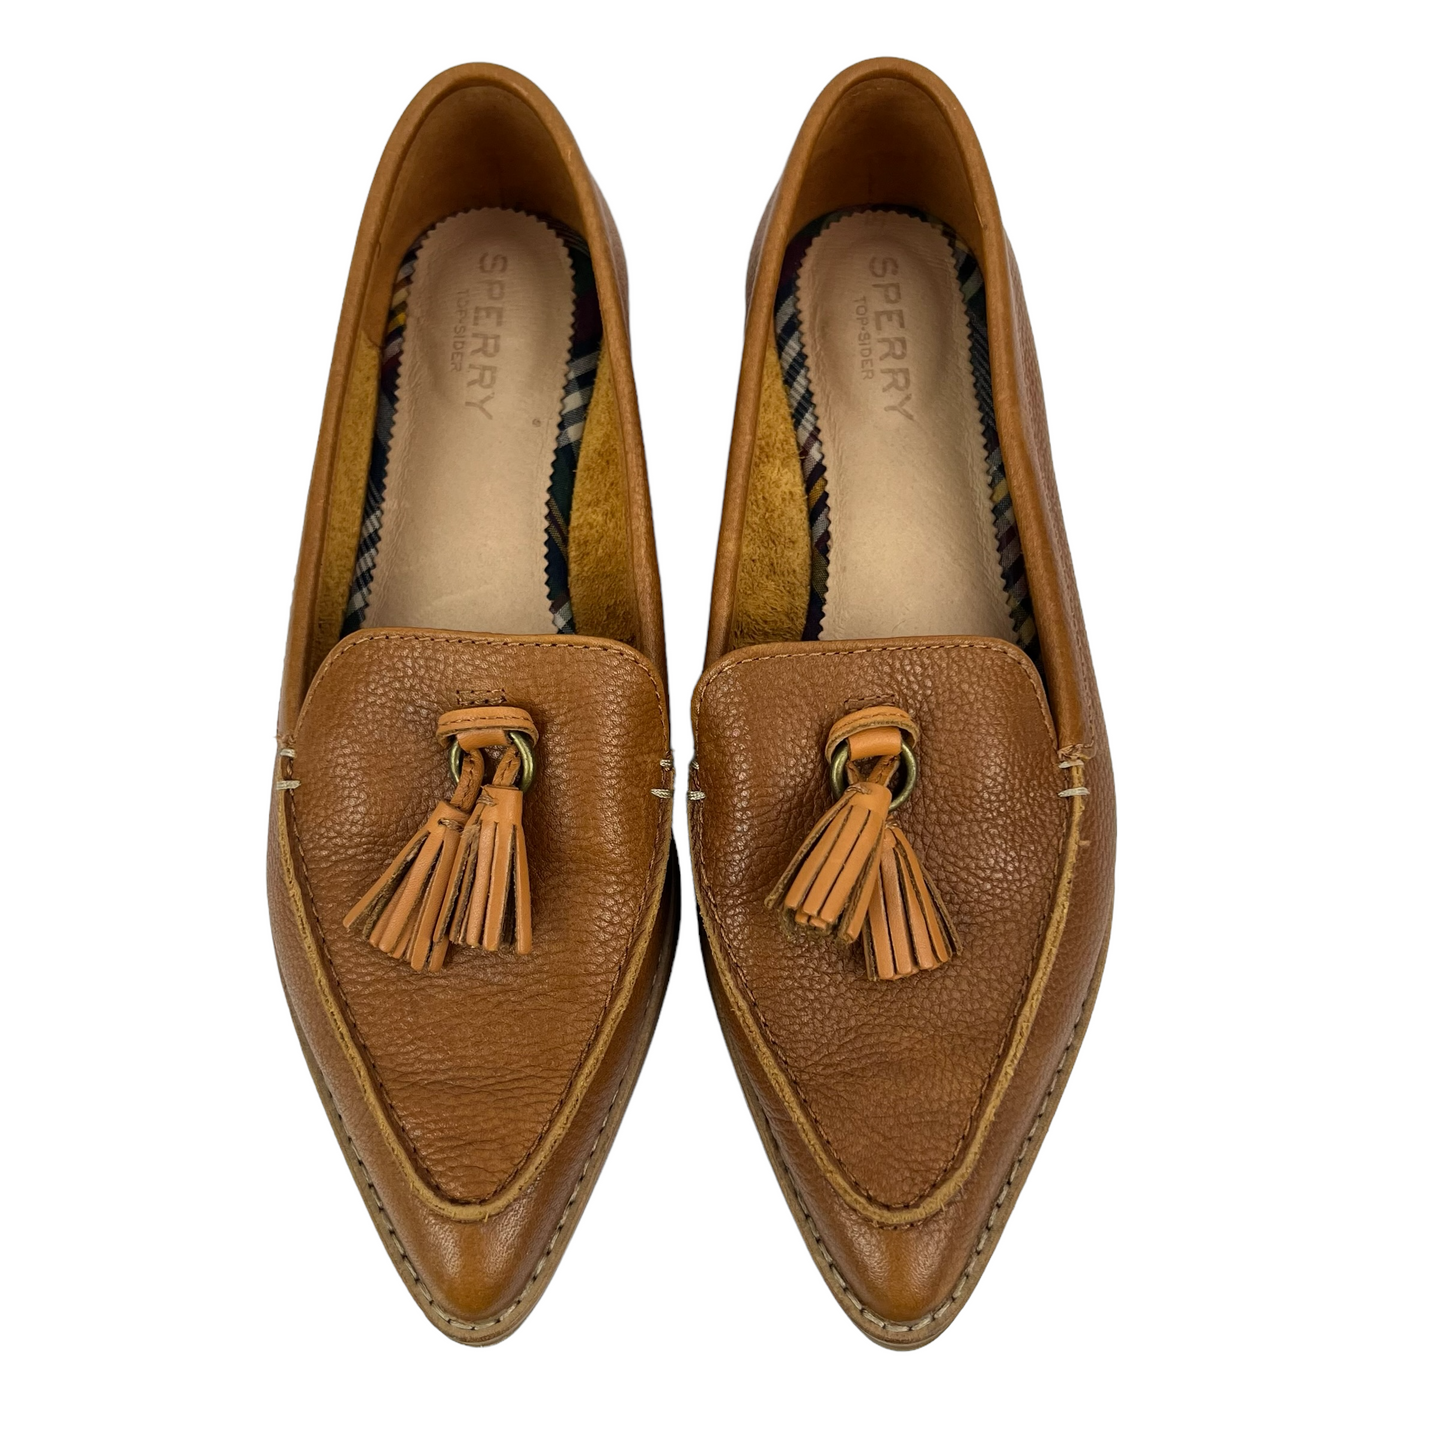 Sperry Top-Sider Saybrook Slip on Tan Leather Loafer with Tassels - Size 7.